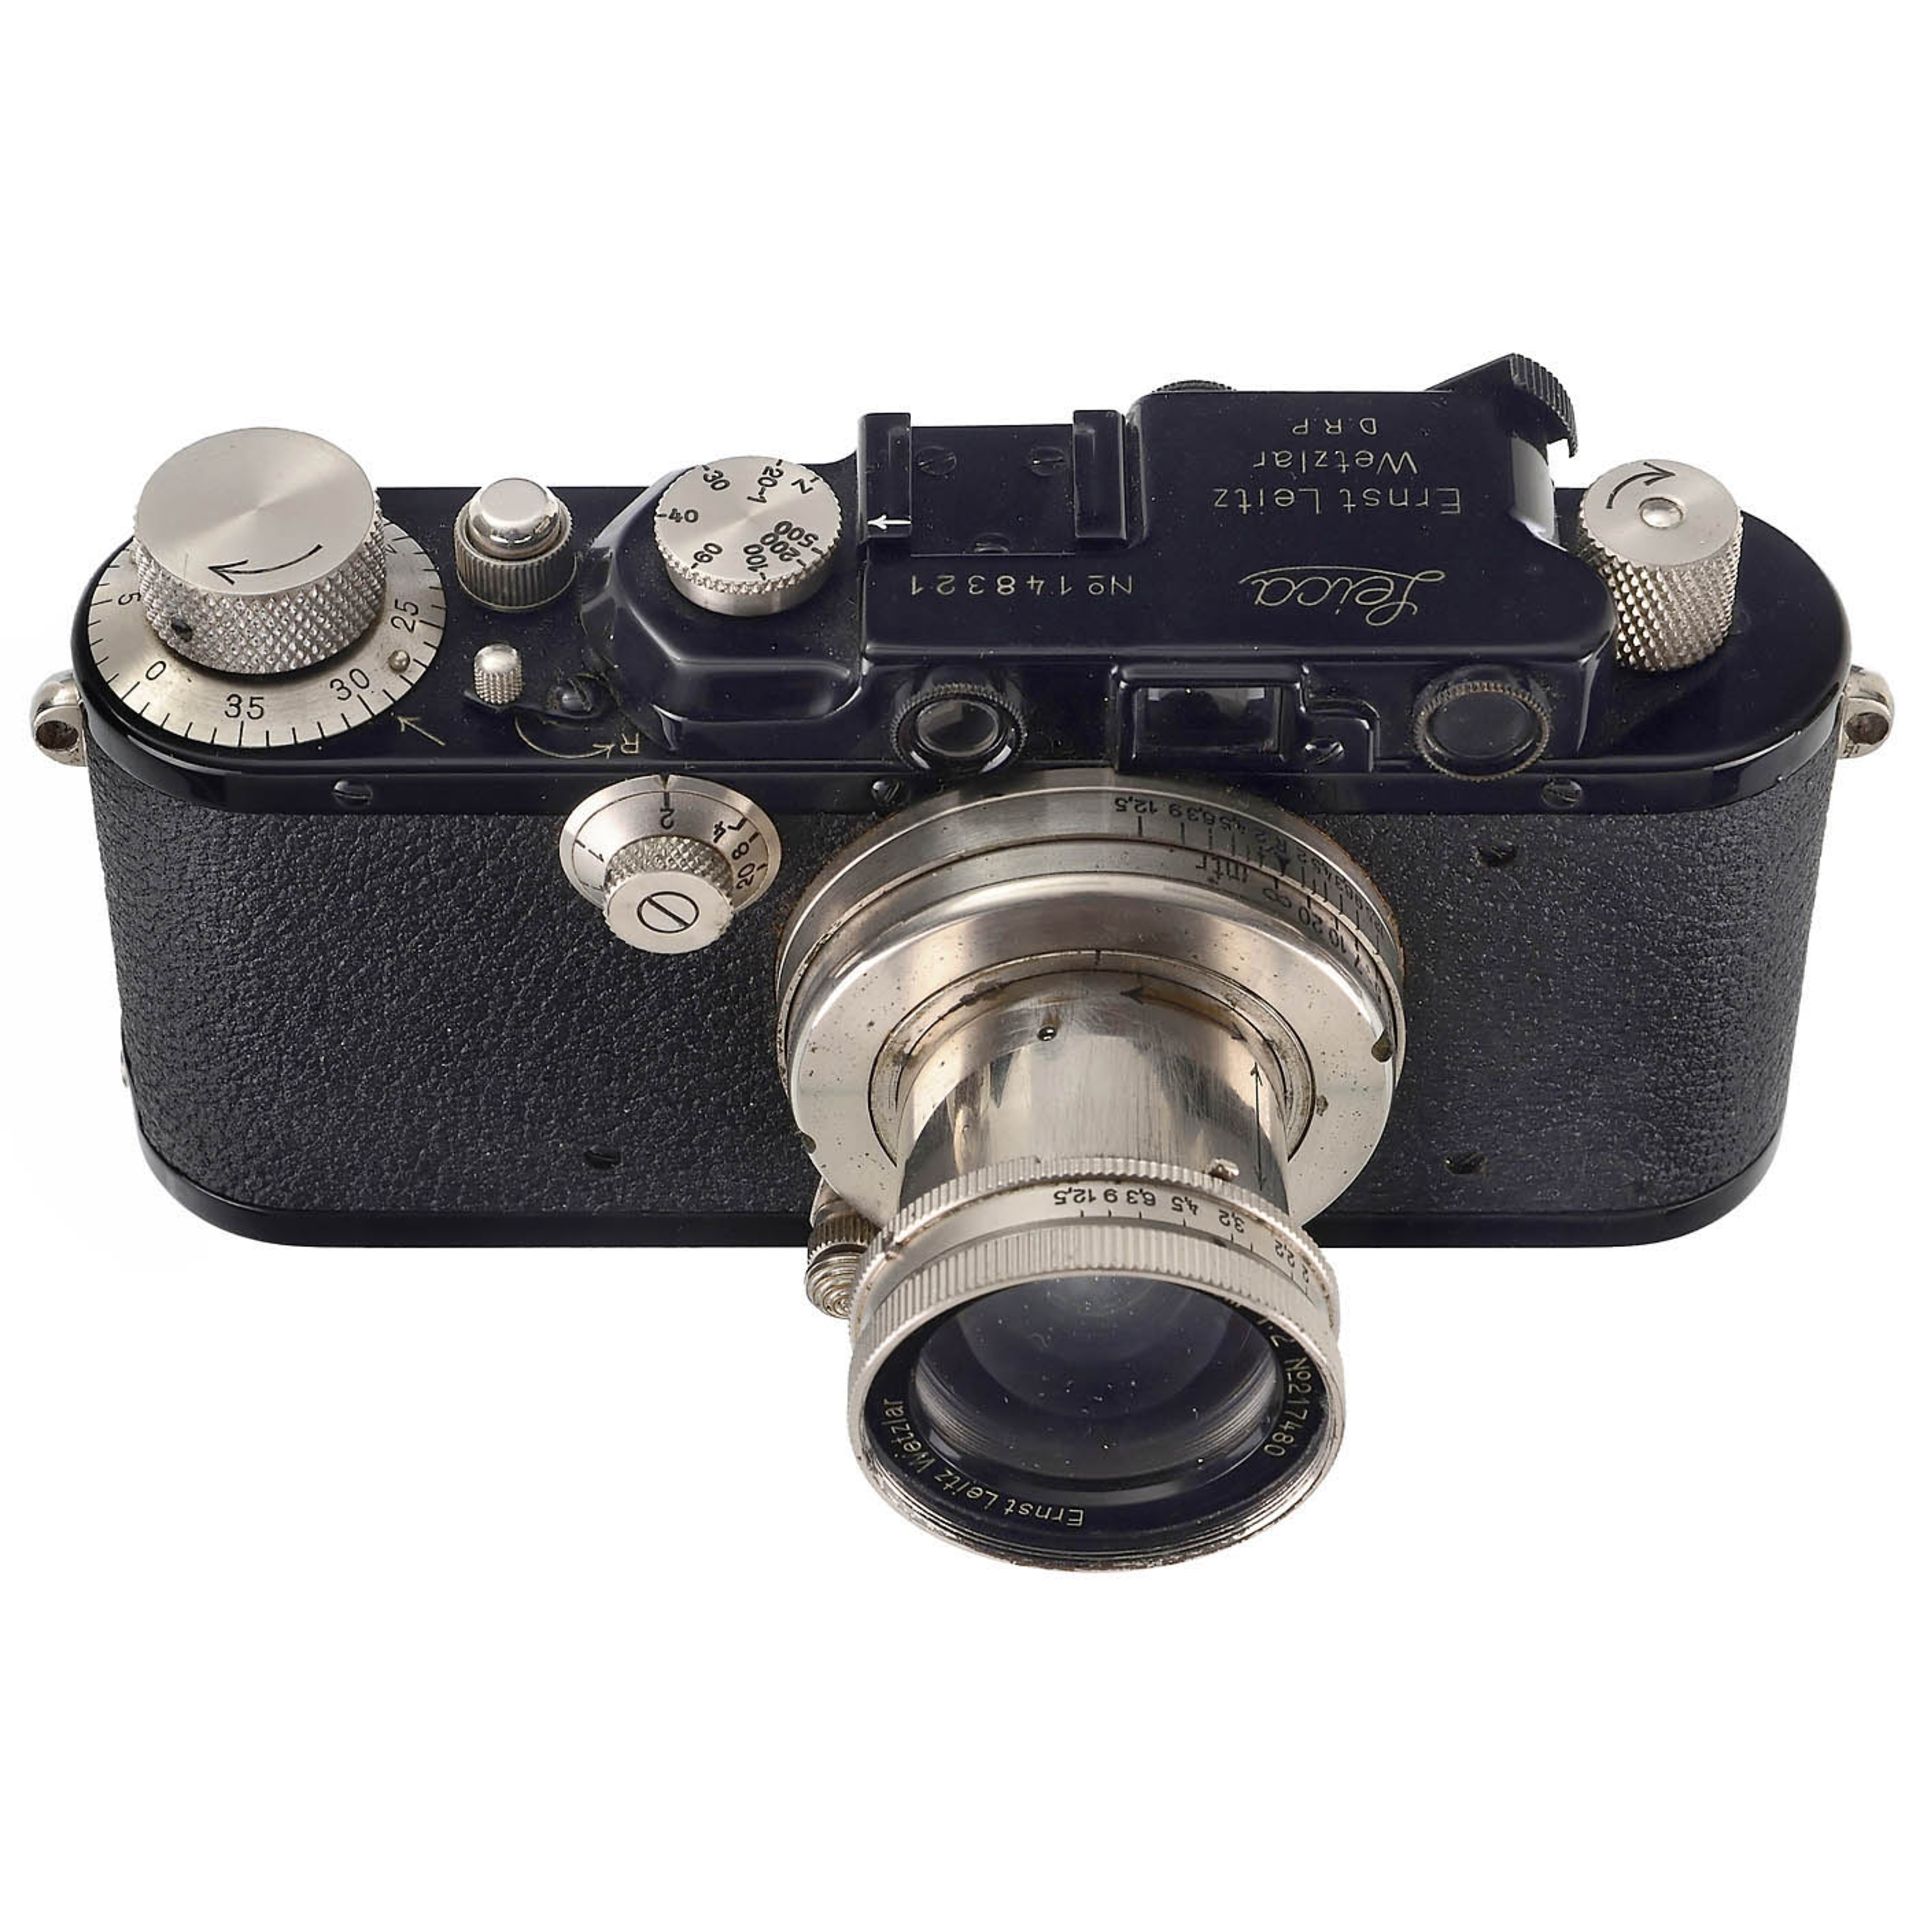 Leica III Camera with 3 Nickel-Plated Lenses, c. 1934 - Image 2 of 3